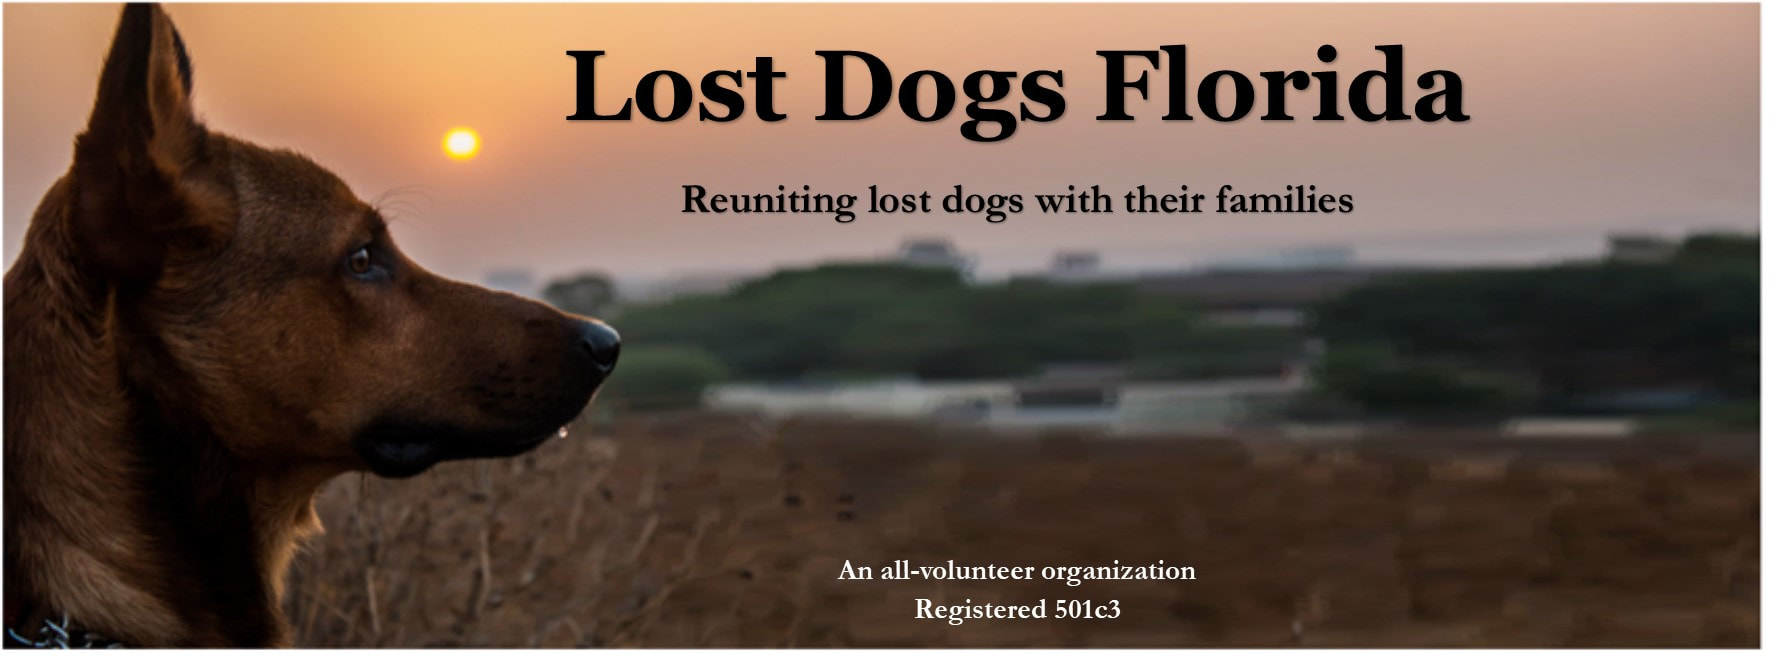 Lost Dogs Florida - Welcome